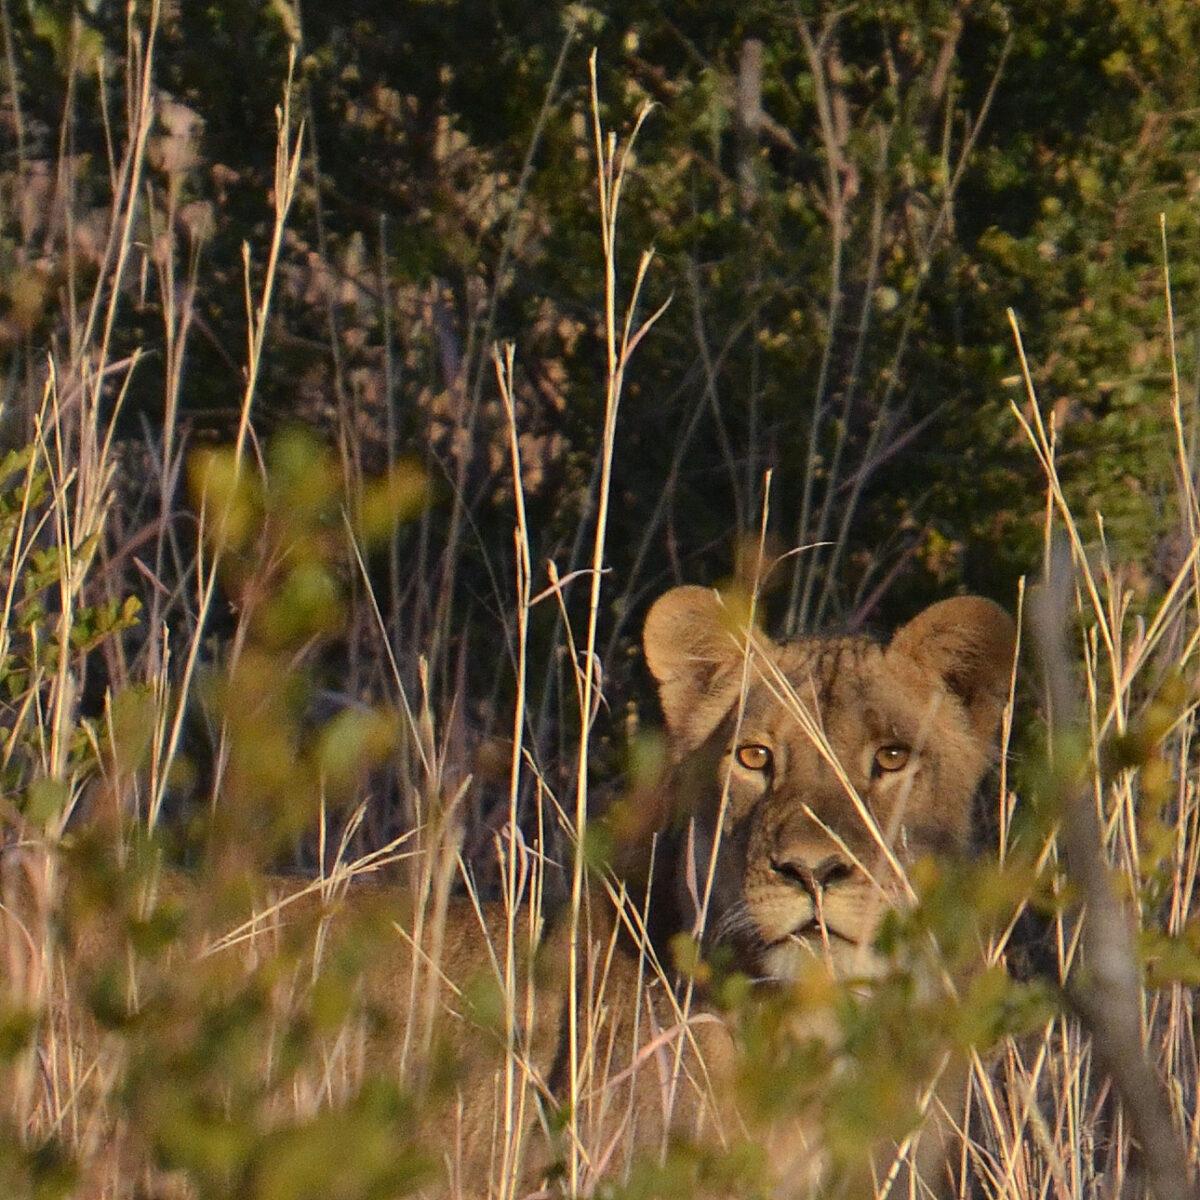 A lioness blends in with the surrounding grasses. (Courtesy of Kevin Revolinski)